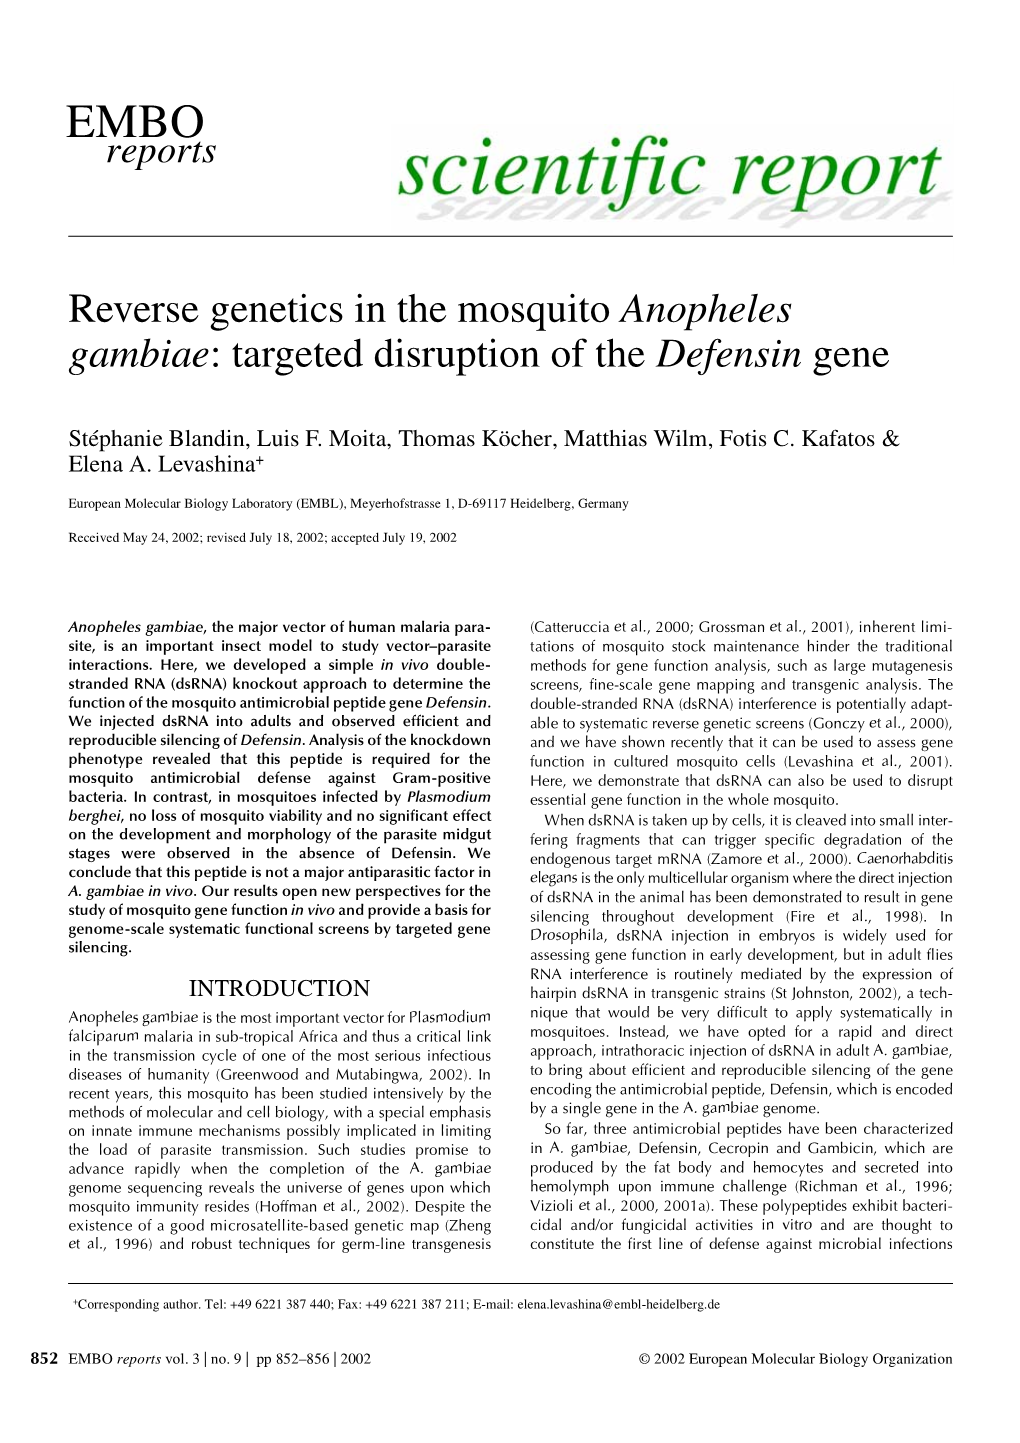 Reverse Genetics in the Mosquito Anopheles Gambiae: Targeted Disruption of the Defensin Gene